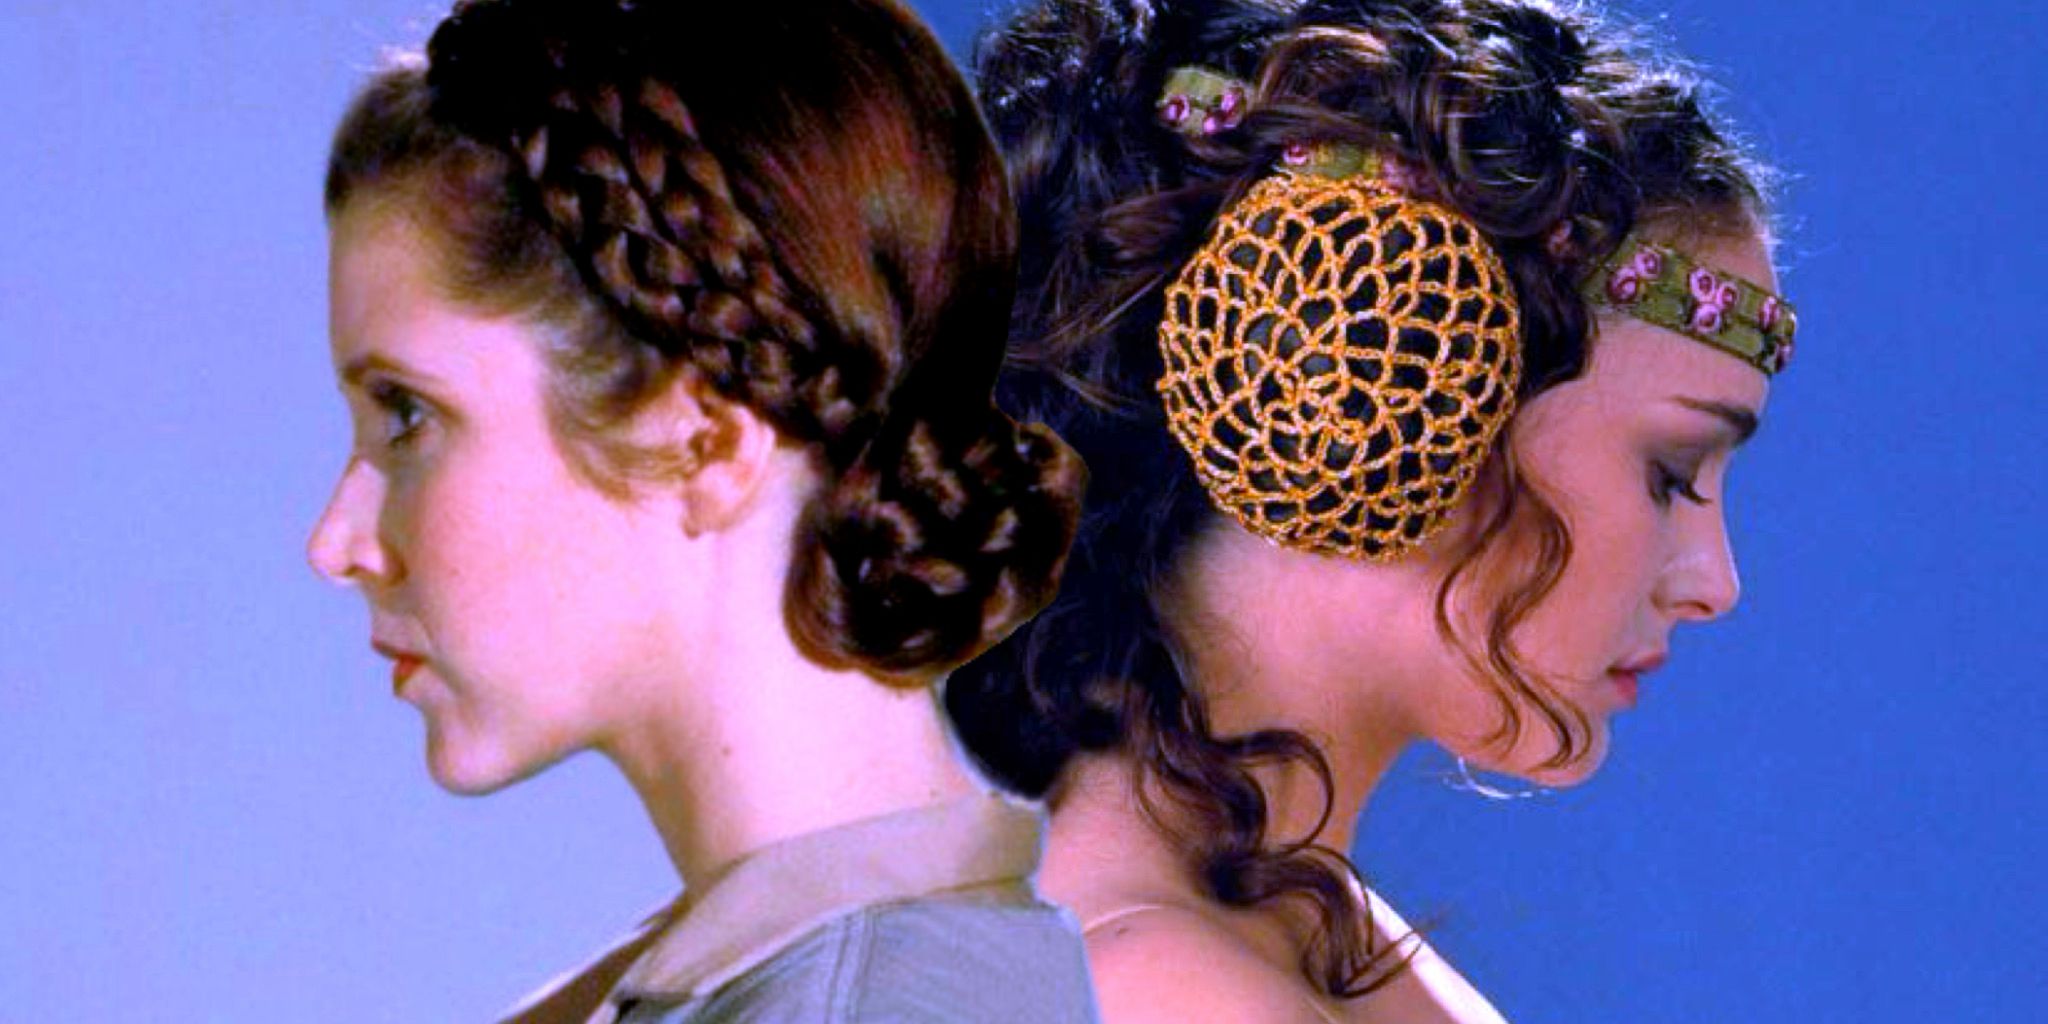 Carrie Fisher as Leia Organa and Natalie Portman as Padme Amidala in photo shoots for Star Wars